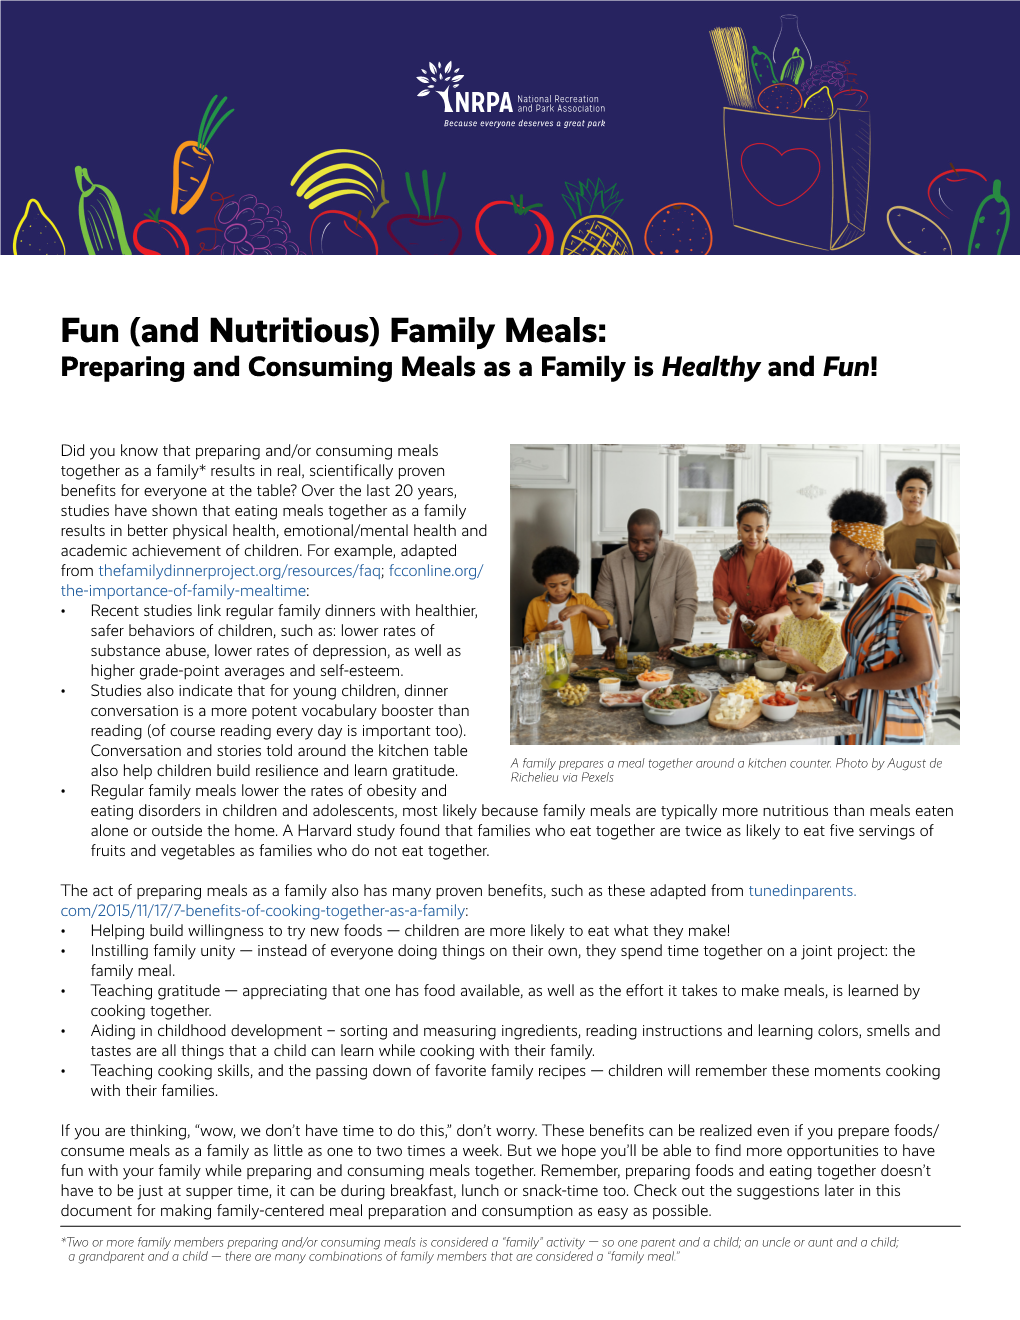 Fun (And Nutritious) Family Meals: Preparing and Consuming Meals As a Family Is Healthy and Fun!